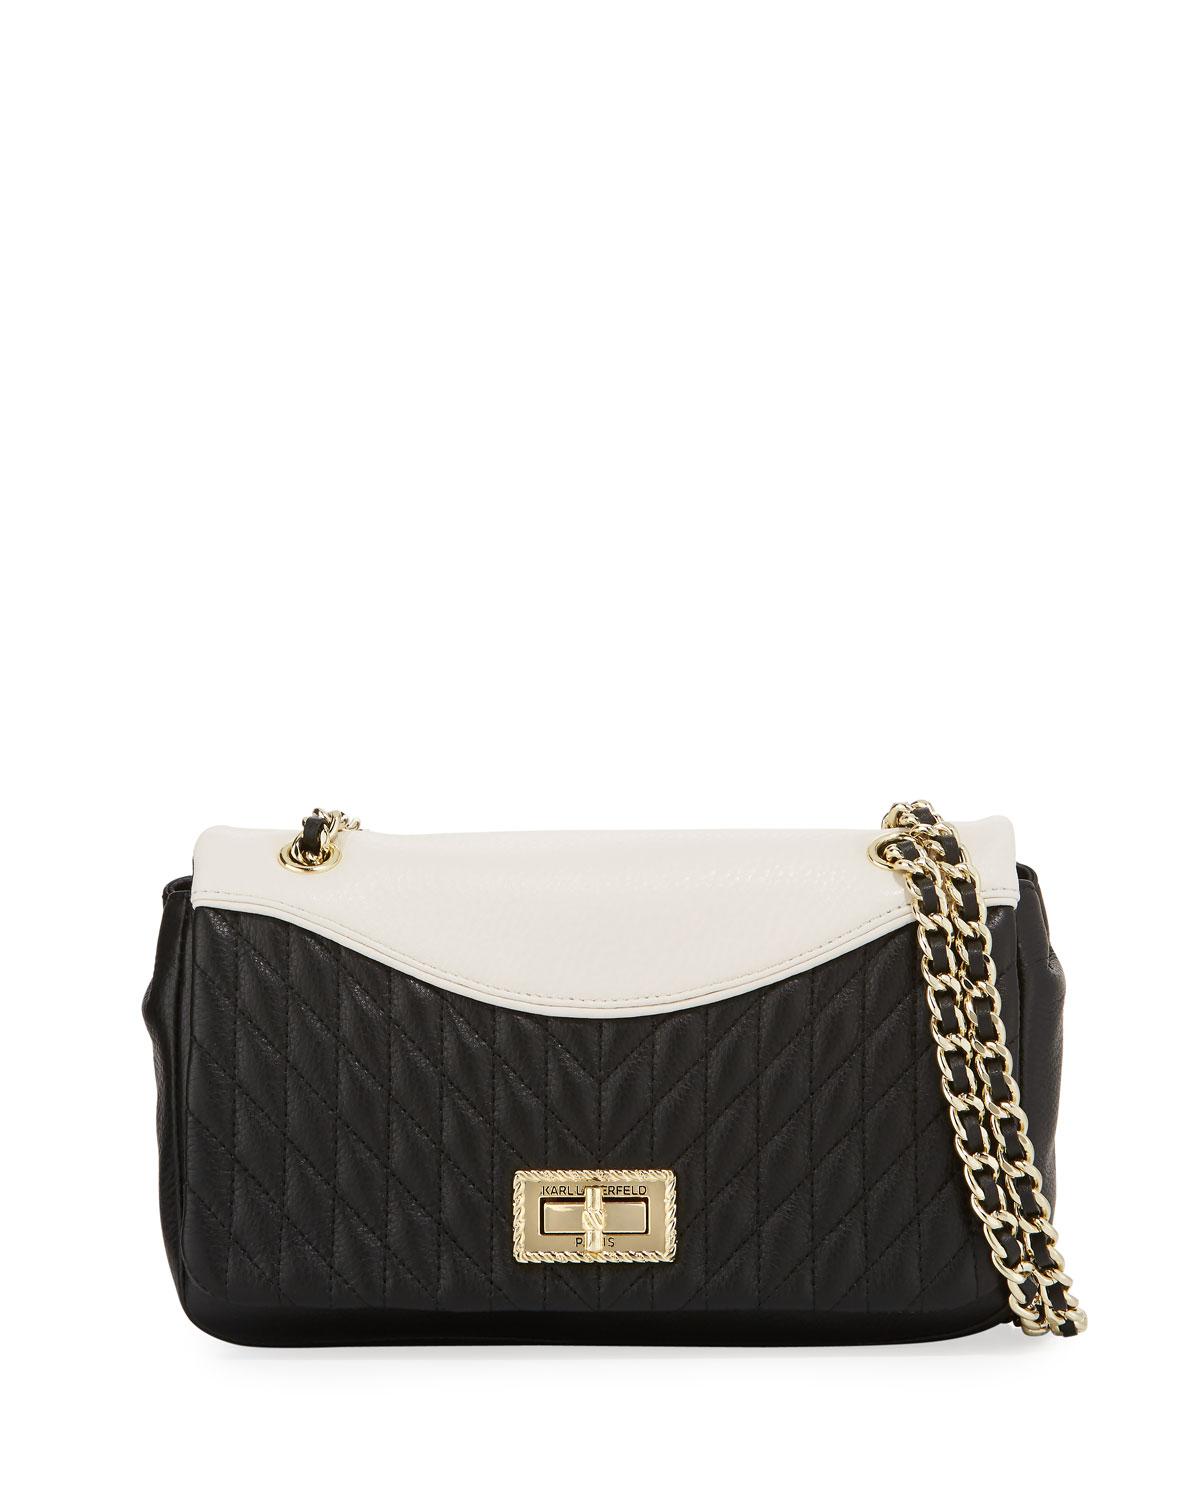 Karl Lagerfeld Leather Agyness Quilted Colorblock Shoulder Bag in Black/White (Black) - Lyst